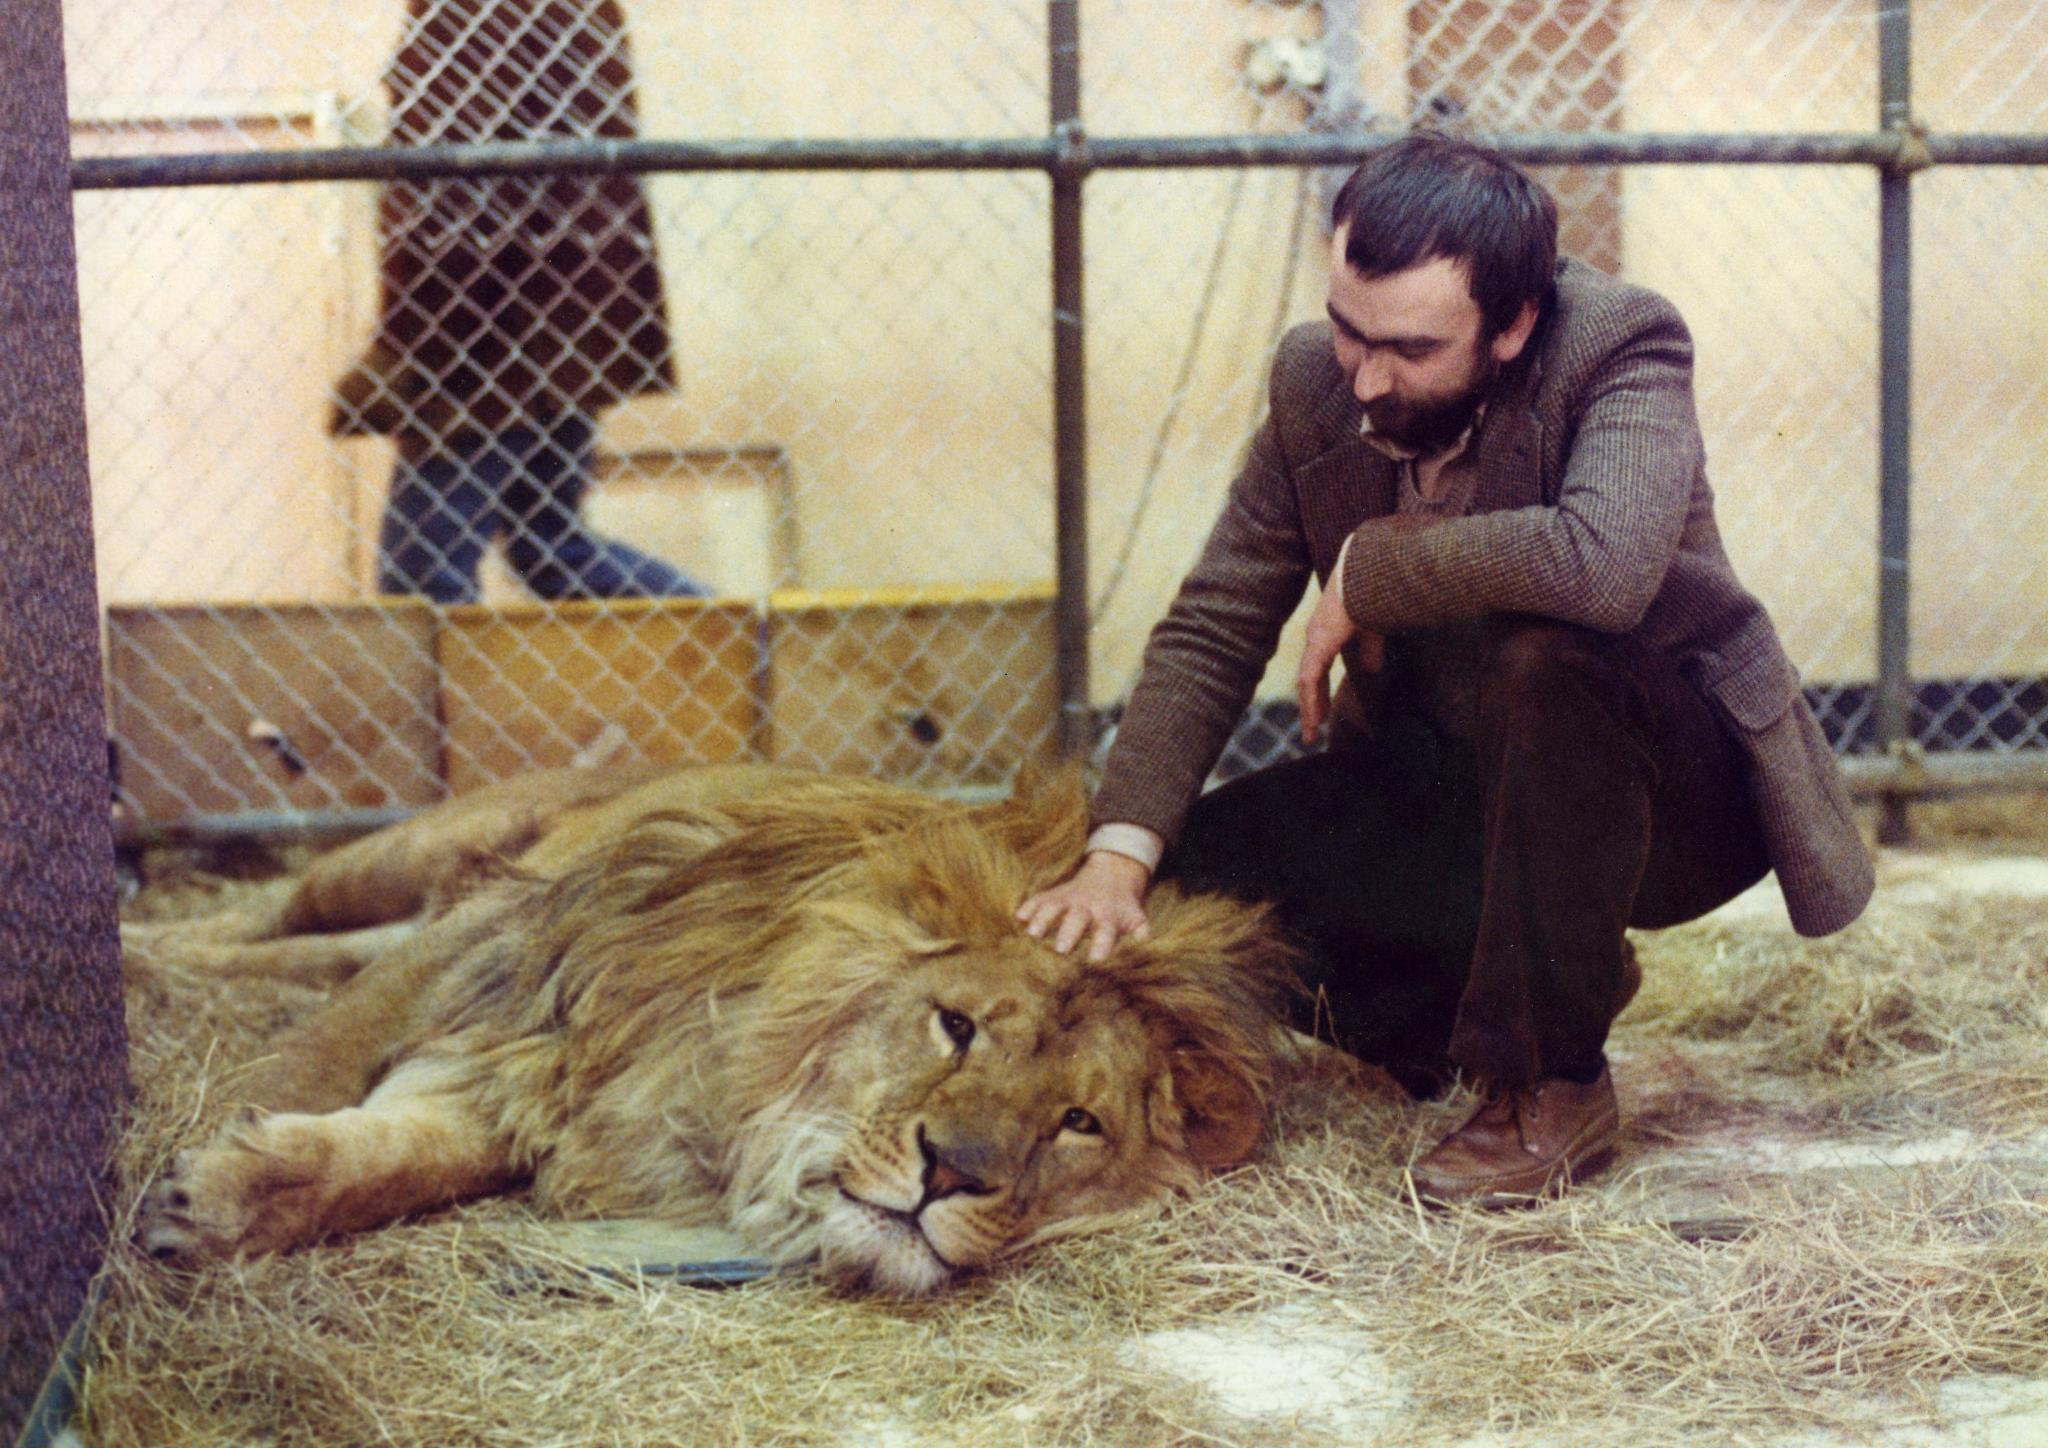 peter_stroking_a_lion_on_the_set_of_a_gyrobank_tv_commercial_in_the_1970s